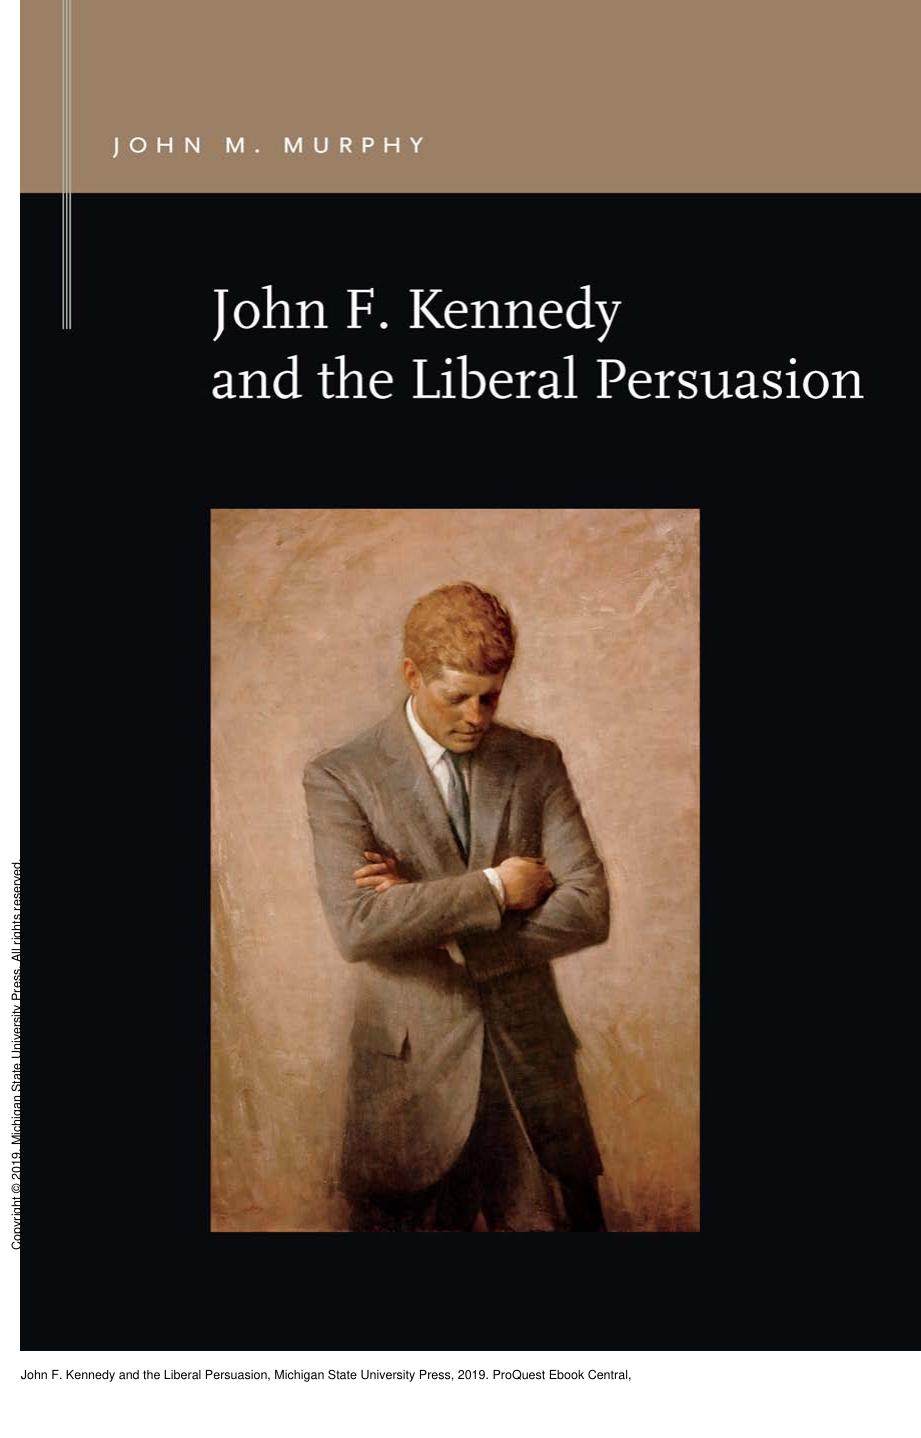 John F. Kennedy and the Liberal Persuasion by John M. Murphy